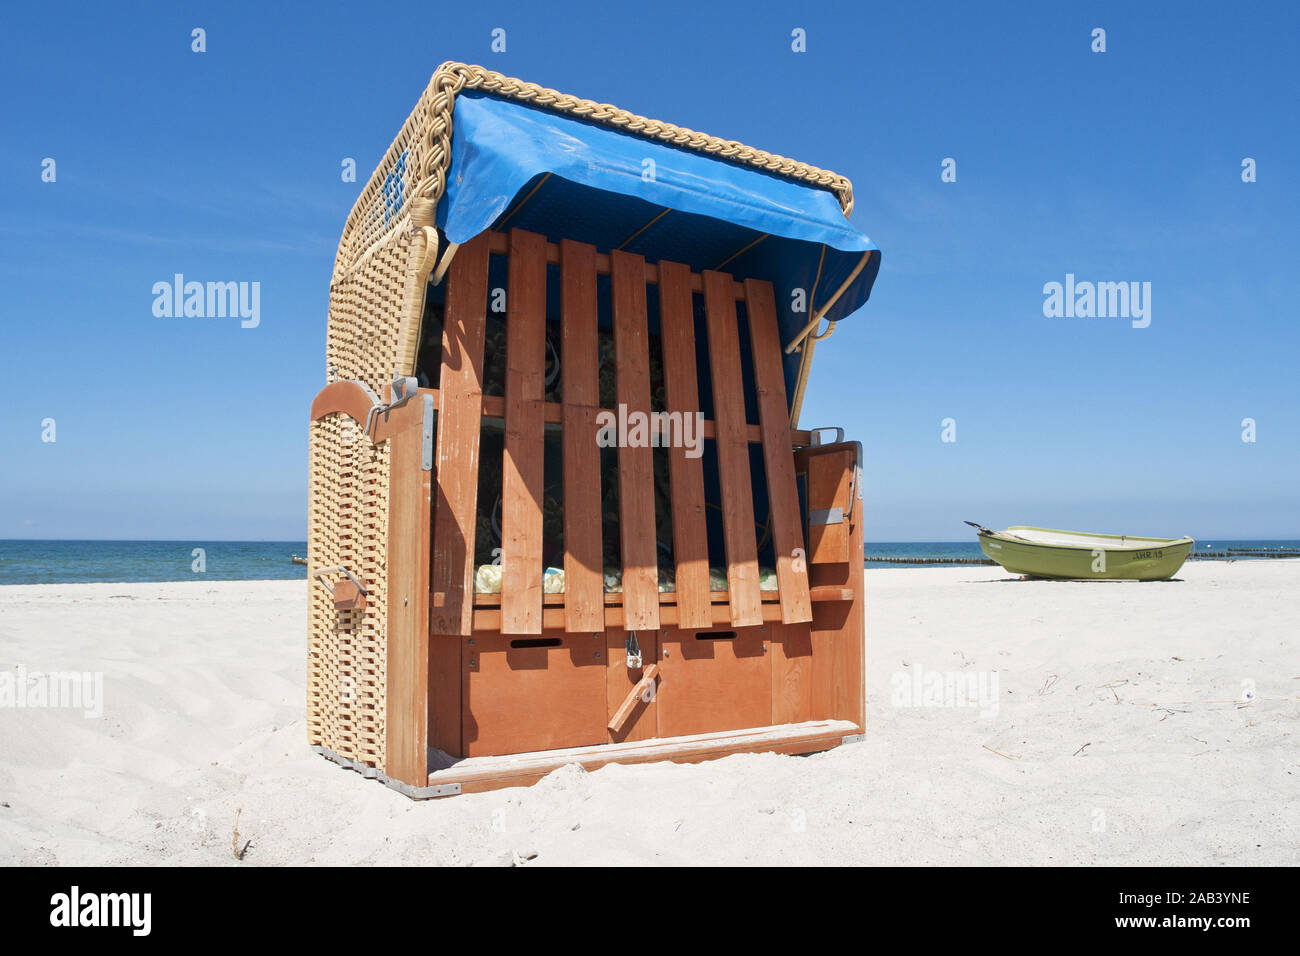 Page 11 - Mieten High Resolution Stock Photography and Images - Alamy